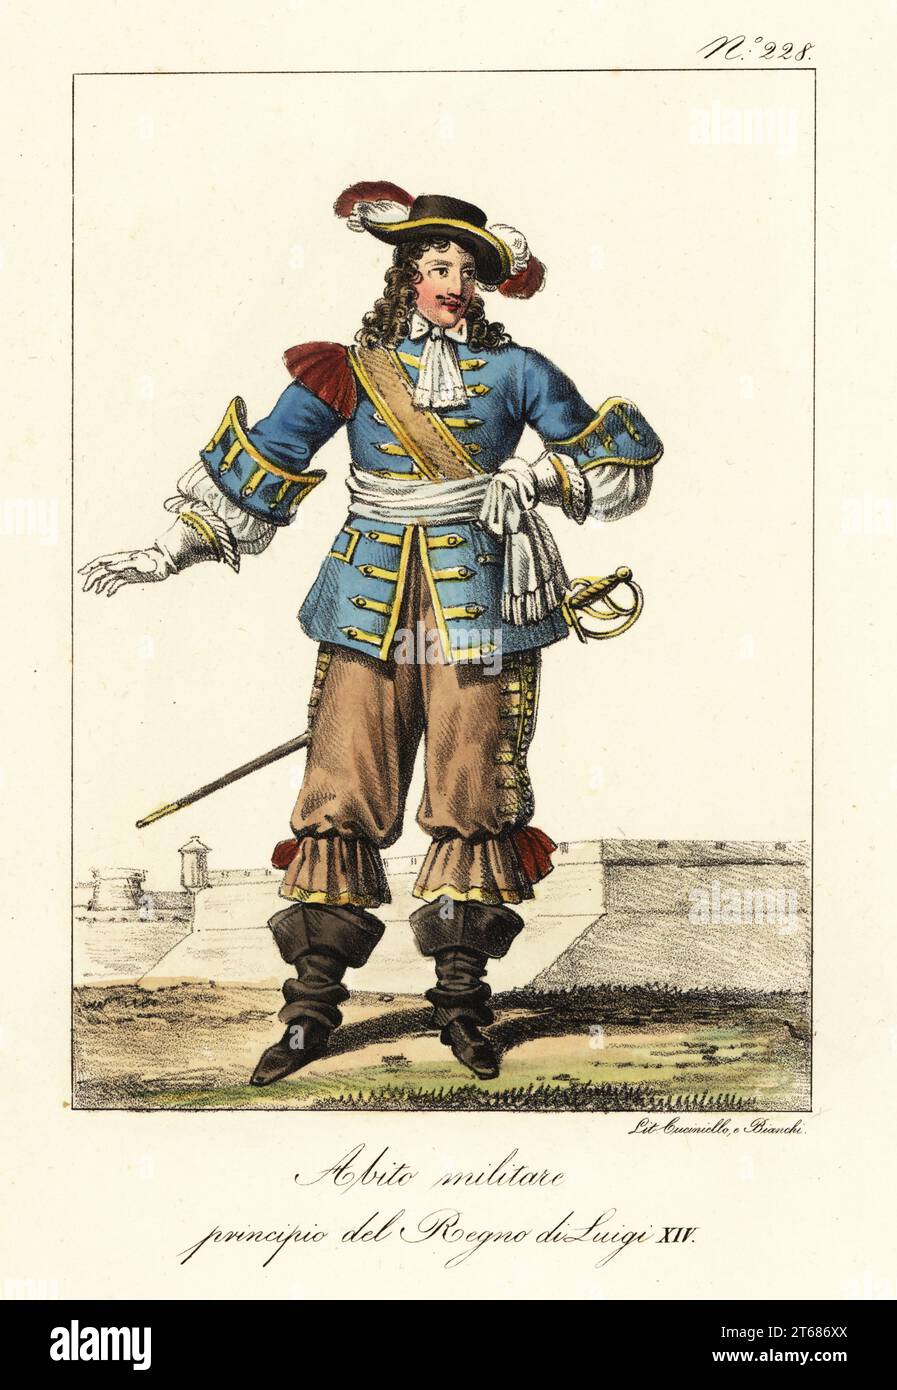 French military uniform of the start of the reign of King Louis XIV. Plumed hat, blue coat with one epaulette, gold frogging, pantalons, cavalier boots, sword. Costume Militaire commencement du Regne de Louis XIV.. Handcoloured lithograph by Lorenzo Bianchi and Domenico Cuciniello after Hippolyte Lecomte from Costumi civili e militari della monarchia francese dal 1200 al 1820, Naples, 1825. Italian edition of Lecomtes Civilian and military costumes of the French monarchy from 1200 to 1820. Stock Photo